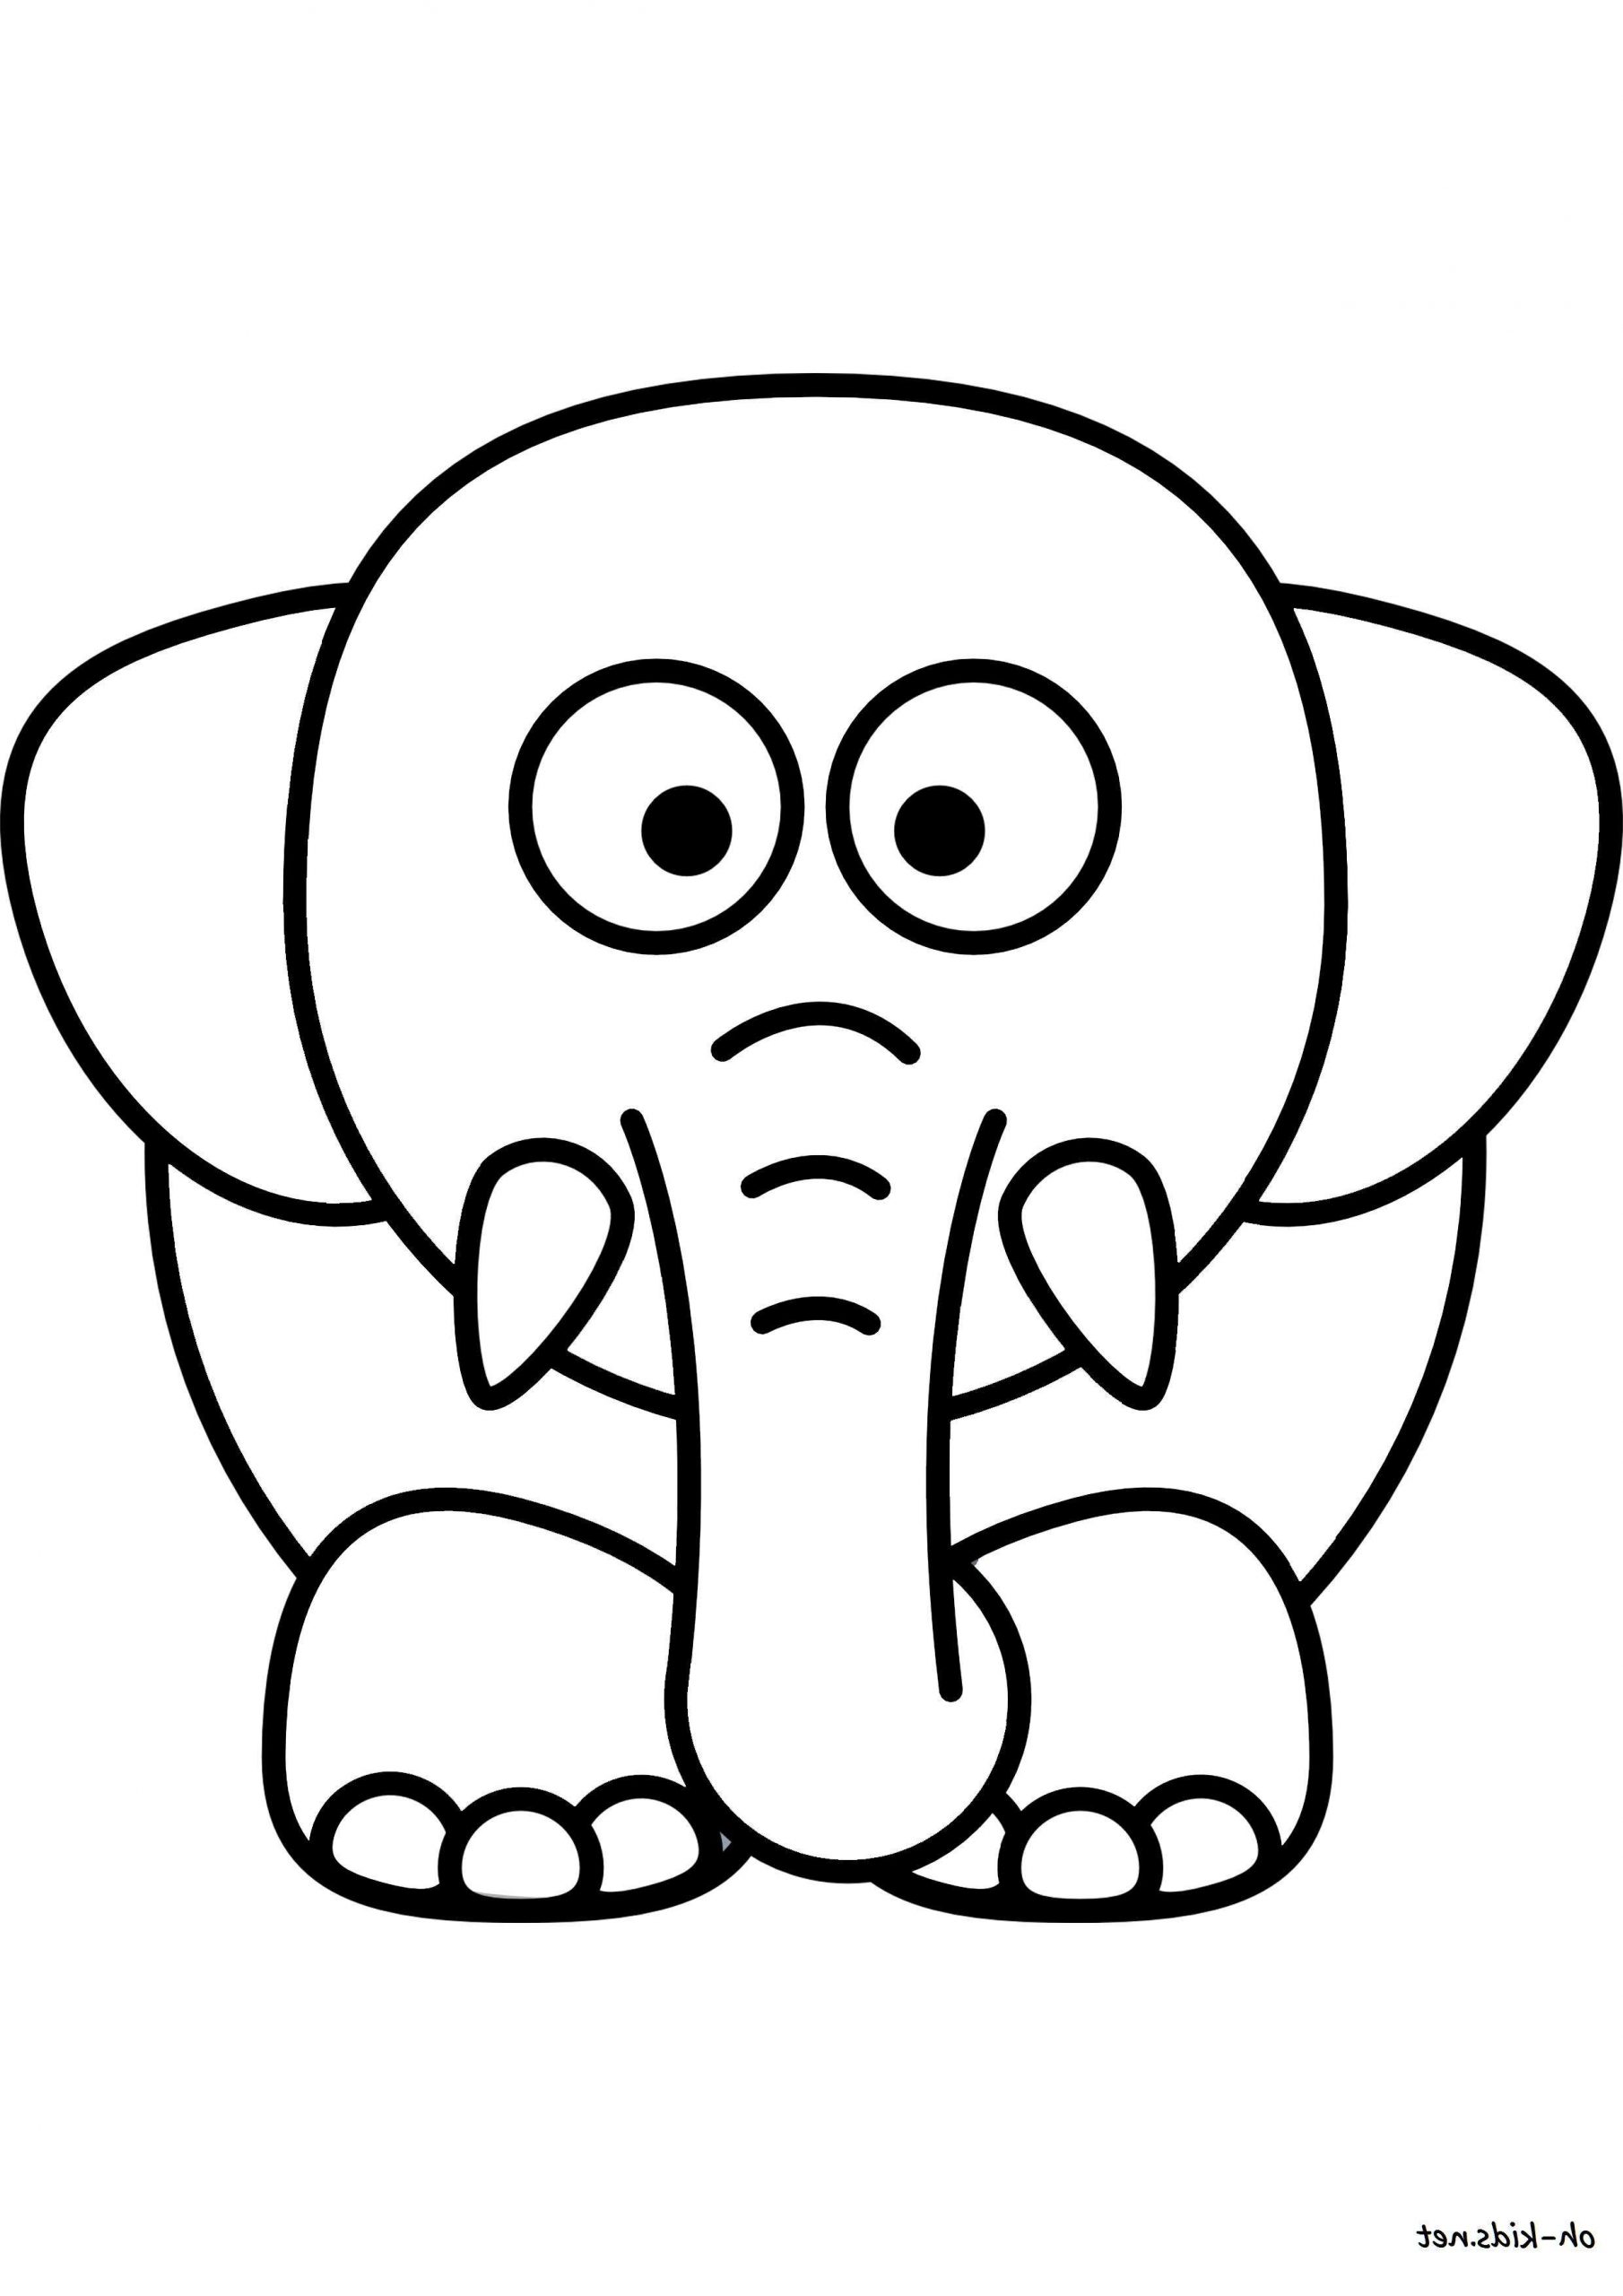 Elephant Dessin De Face Luxe Photos Coloriage Animaux Page 10 Of 84 Oh Kids Fr